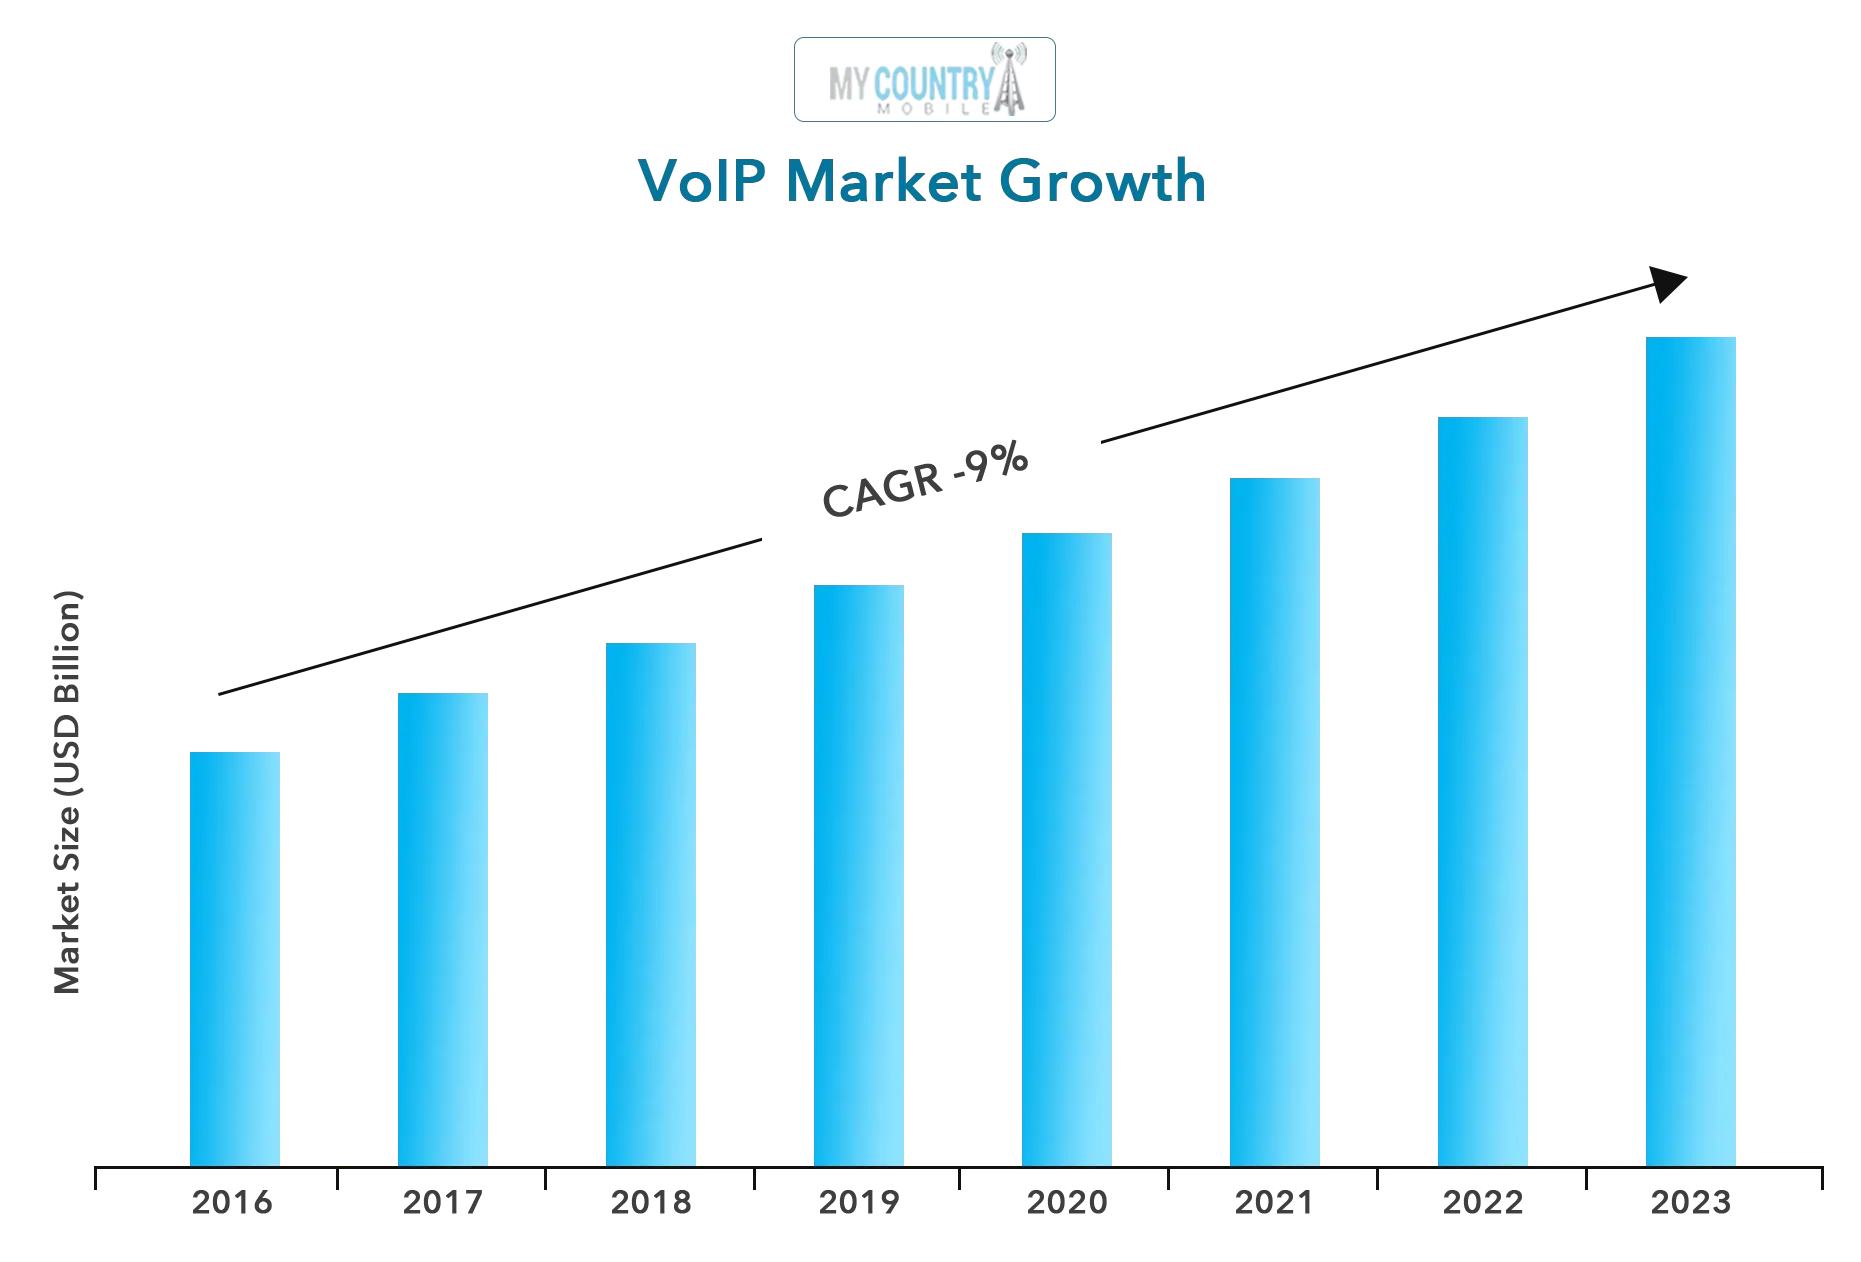 voip market share 2017 growth